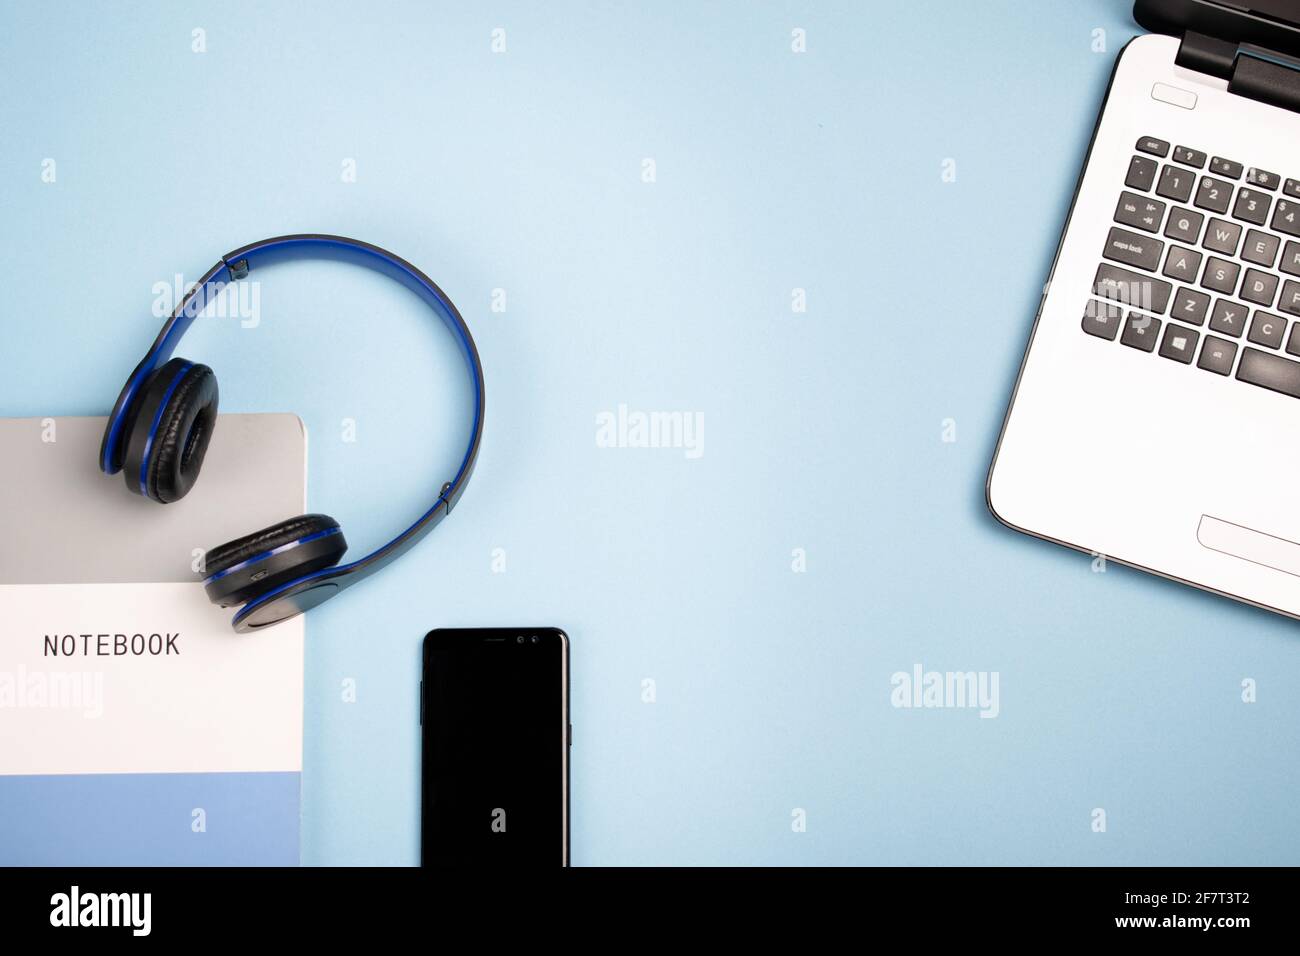 Notebook, headphones a mobile phone and laptop on a blue surface with a copy space Stock Photo